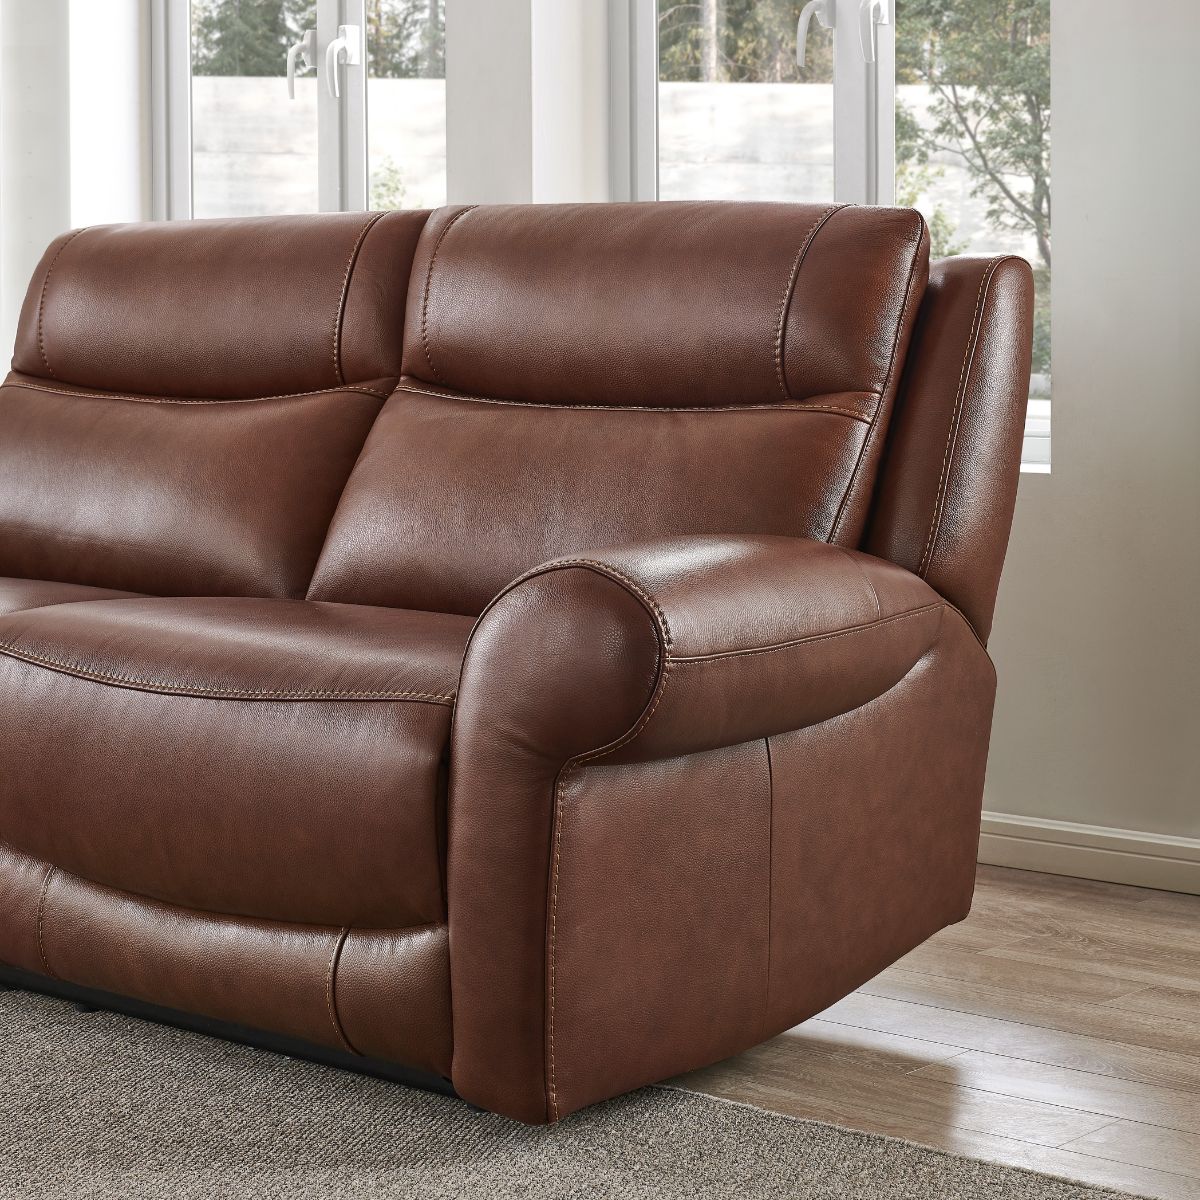 Lindfield Tan Leather 2 Seater Powered Recliner - 4